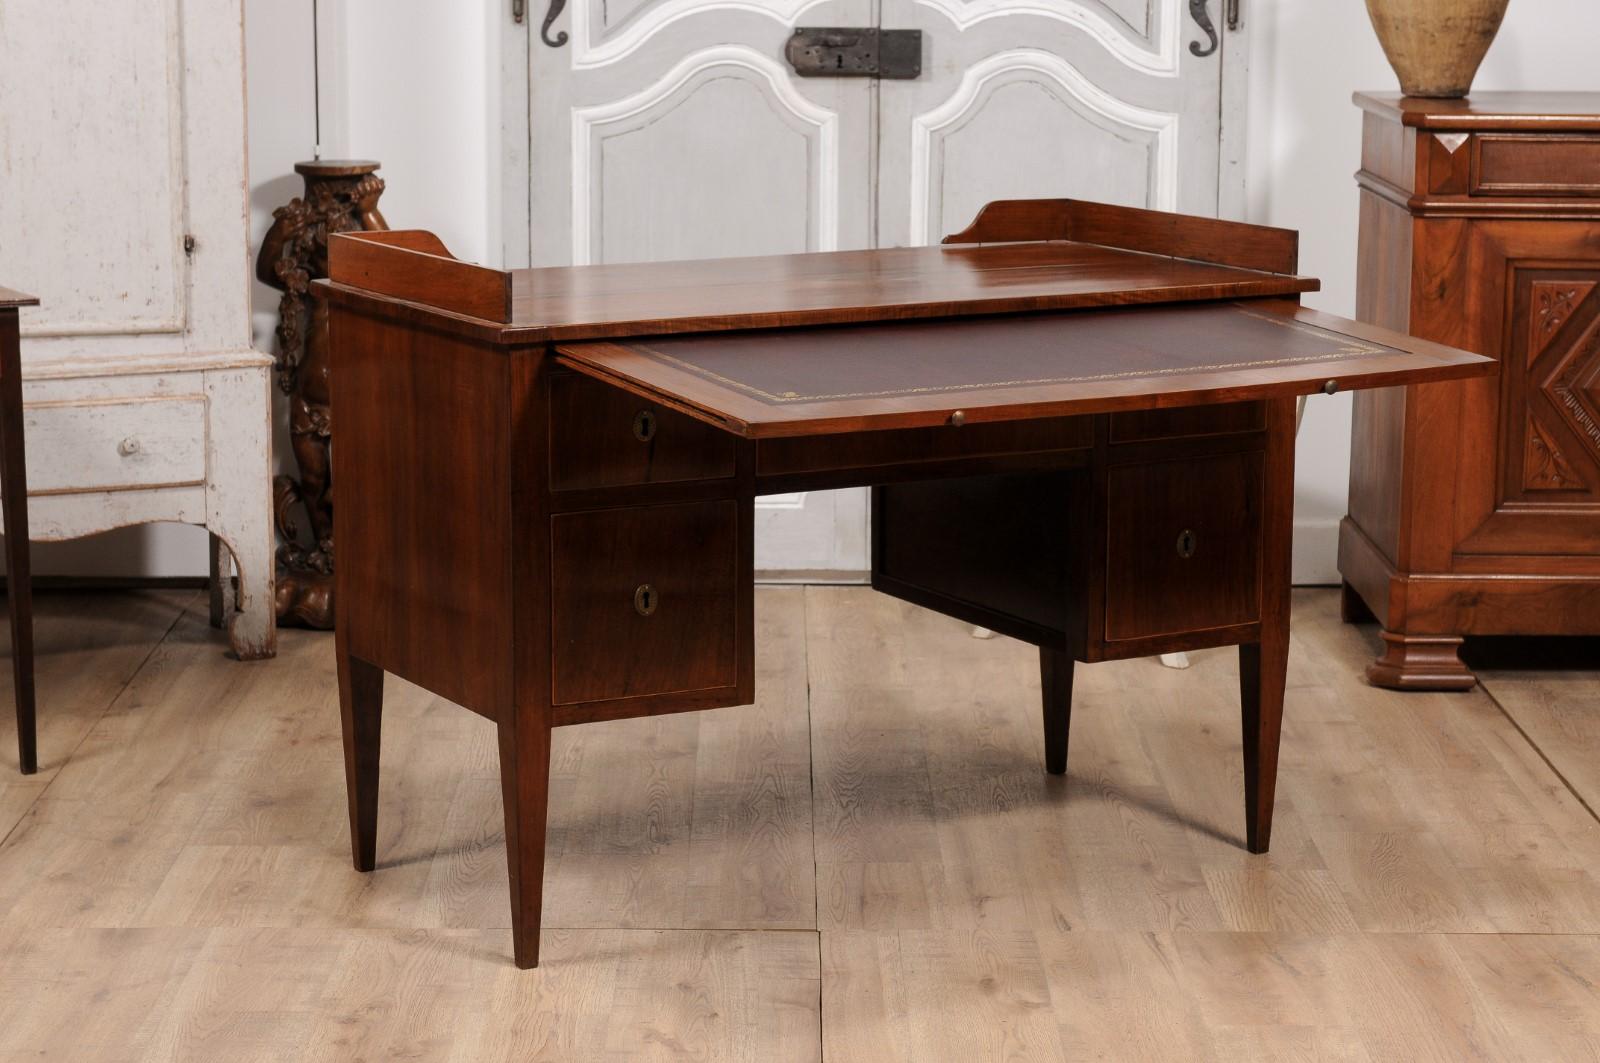 19th Century Italian 1820s Walnut and Mahogany Desk with Five Drawers, Pull-out and Banding For Sale